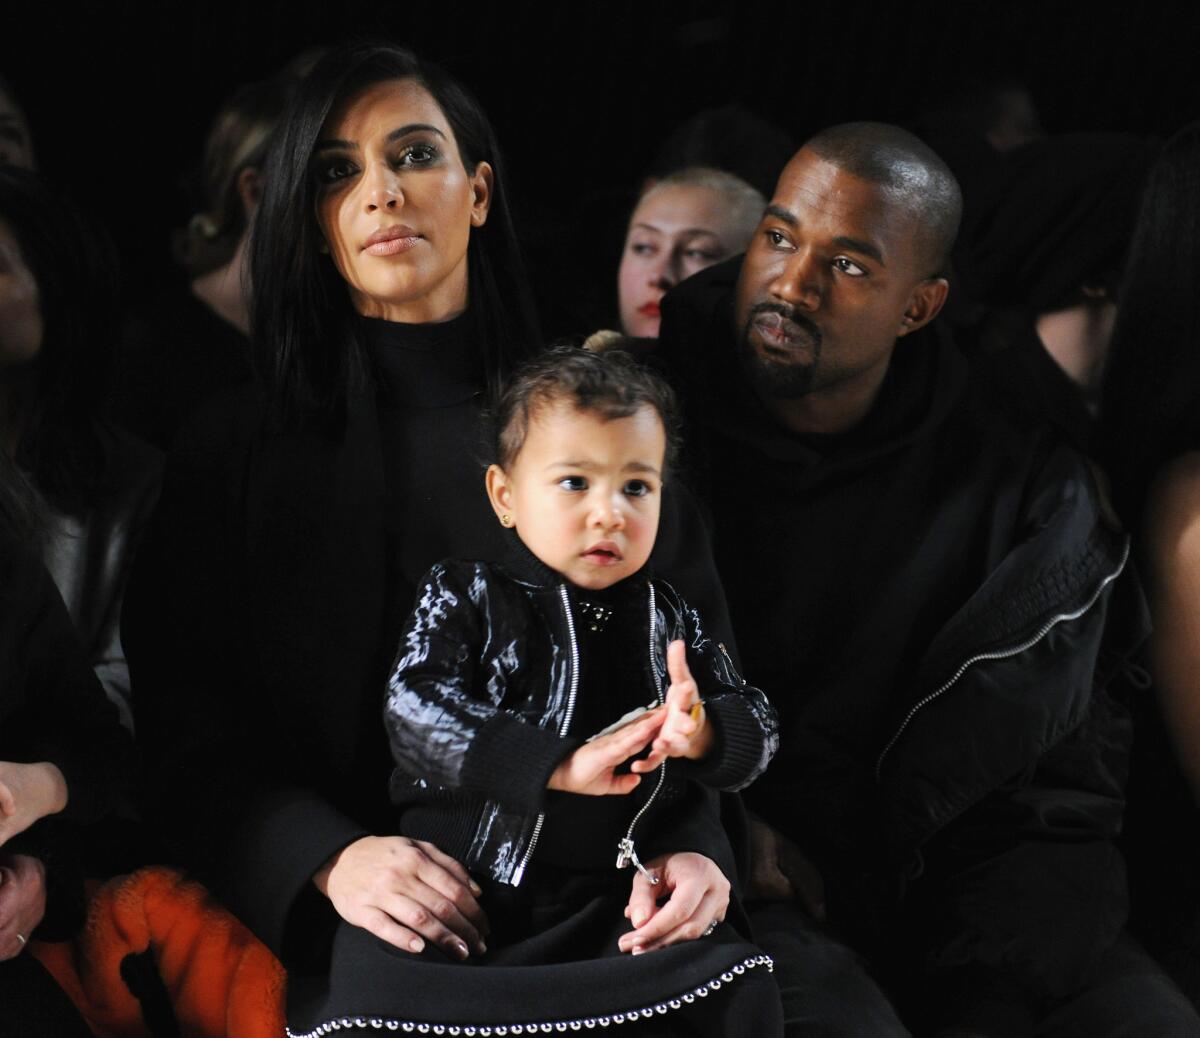 Kim Kardashian with daughter North West and husband Kanye West at Alexander Wang's New York Fashion Week Show this month.